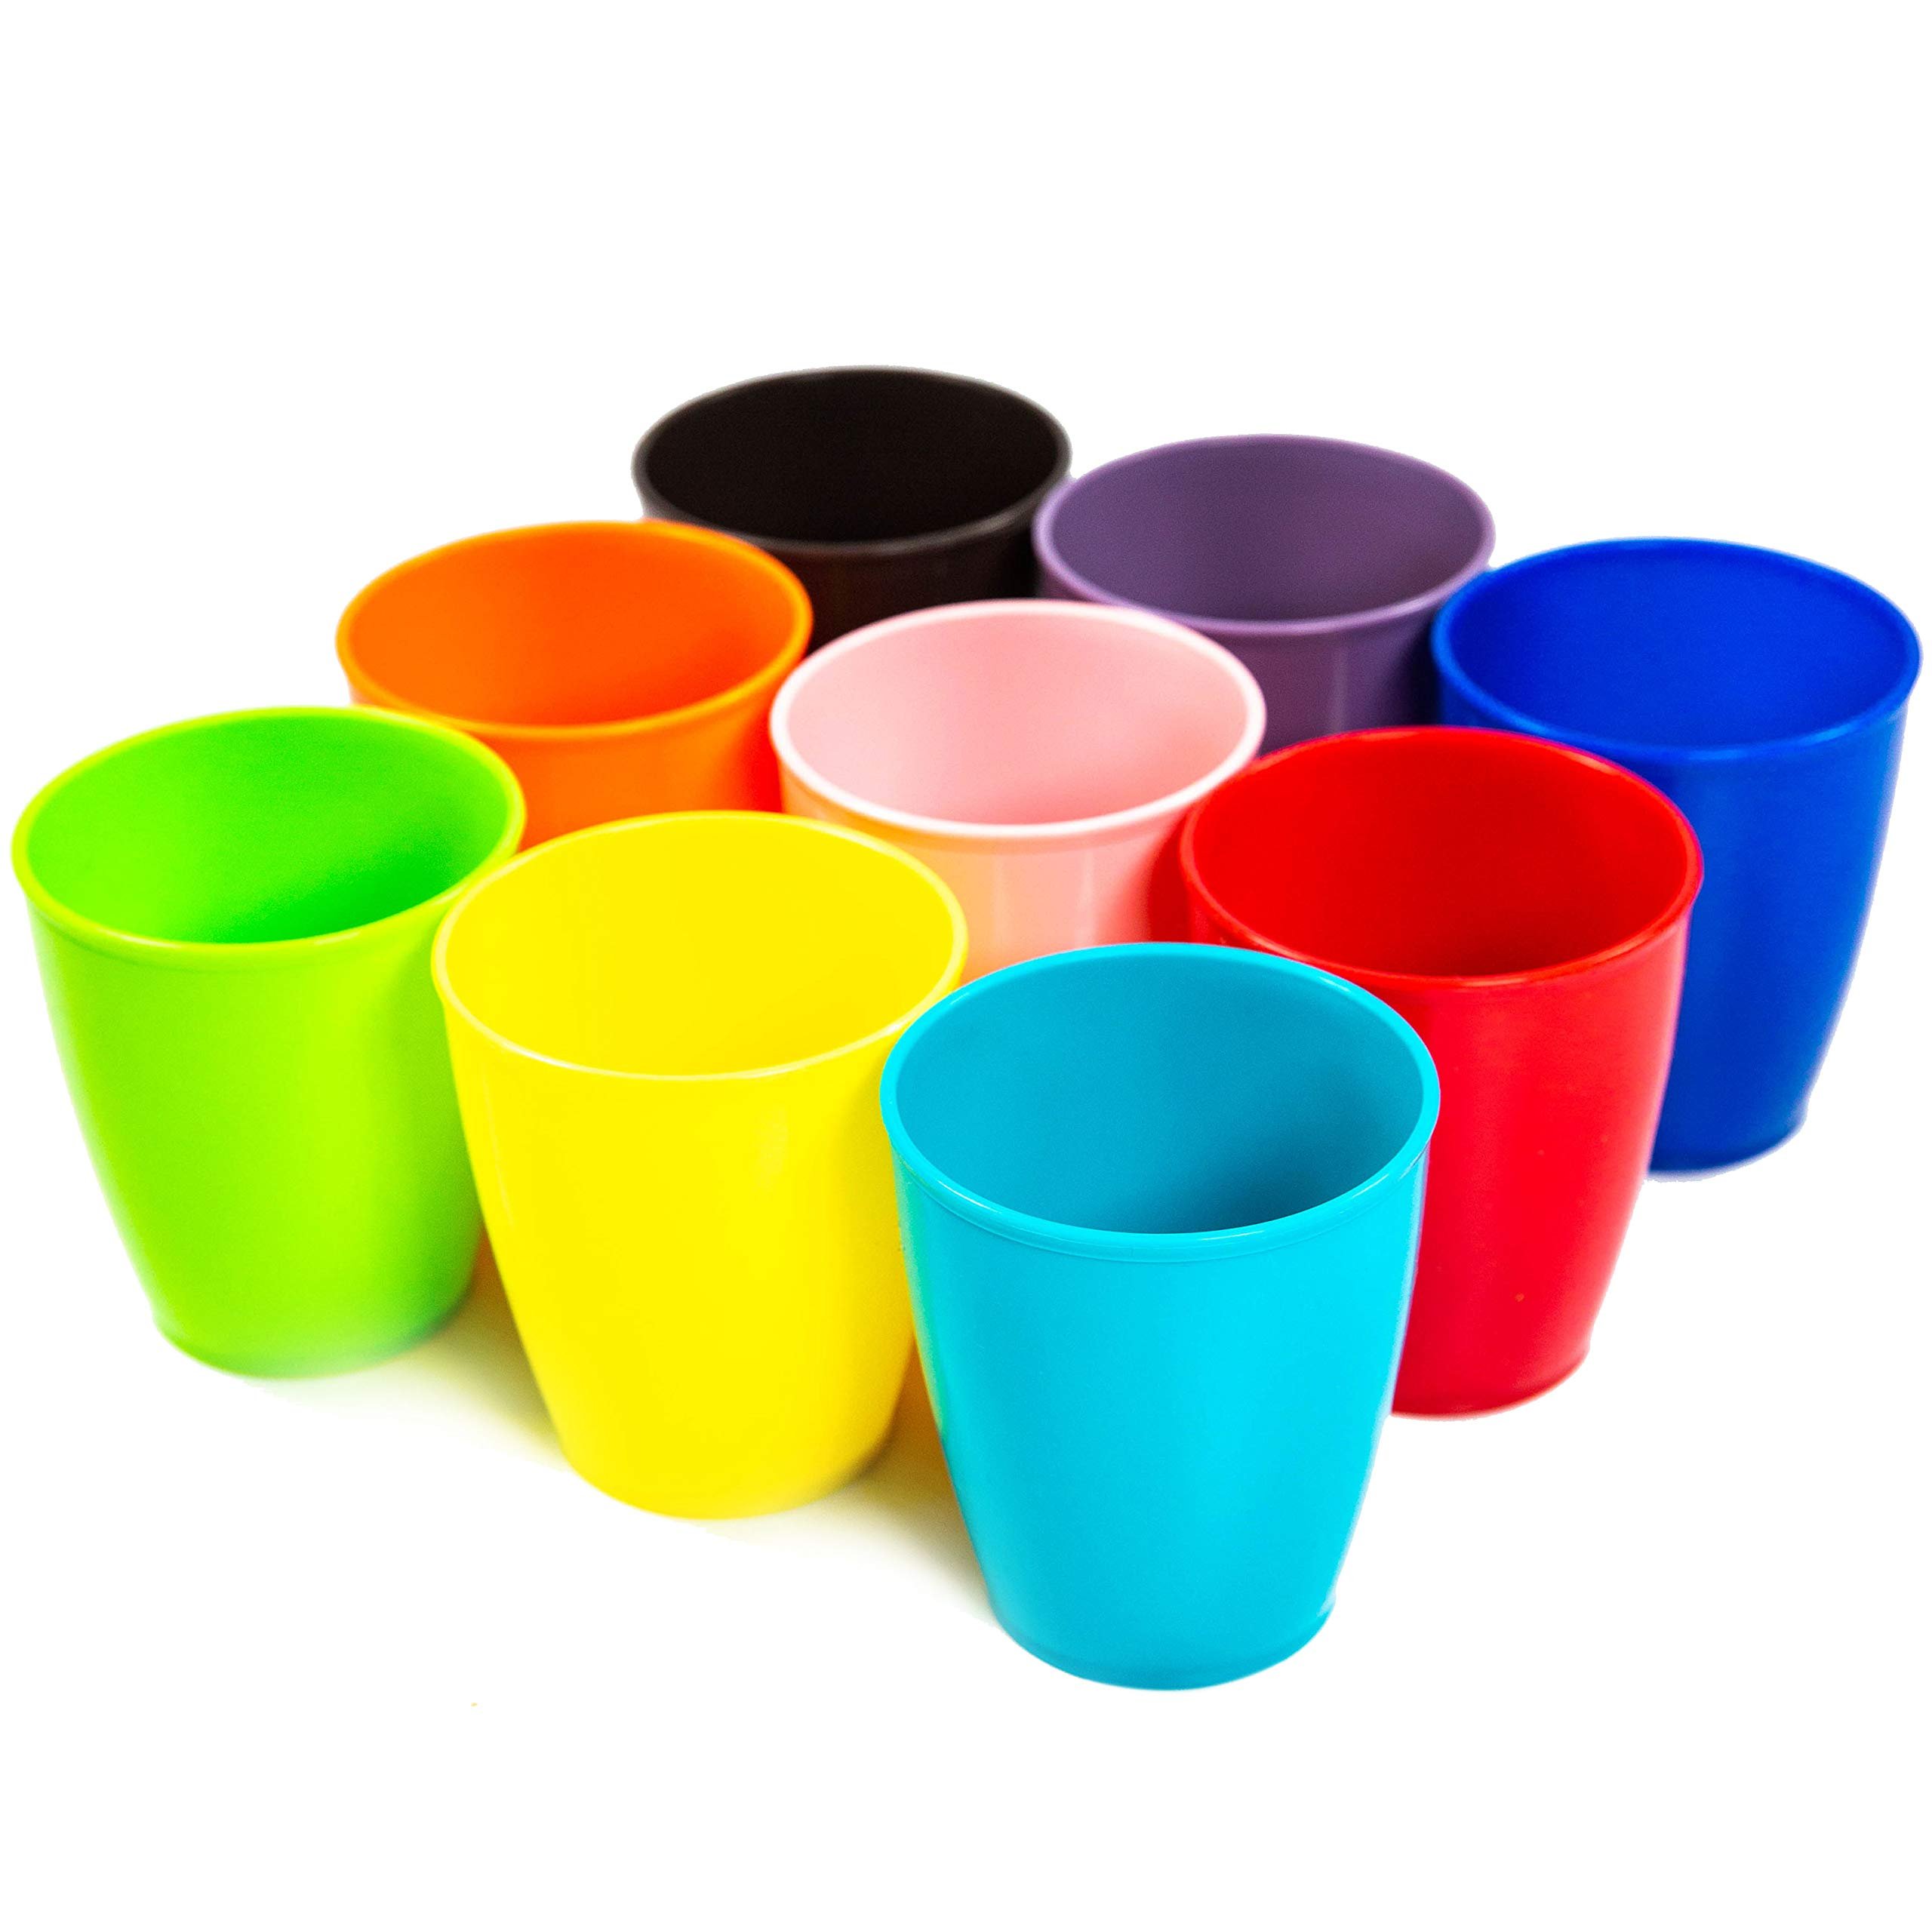 10 X YOUNGEVER 9 PACK RE-USABLE 250ML KIDS CUPS, KIDS PLASTIC CUPS, KIDS DRINKING CUPS, TODDLER CUPS IN 9 ASSORTED COLORS (RAINBOW) - TOTAL RRP £116: LOCATION - B RACK